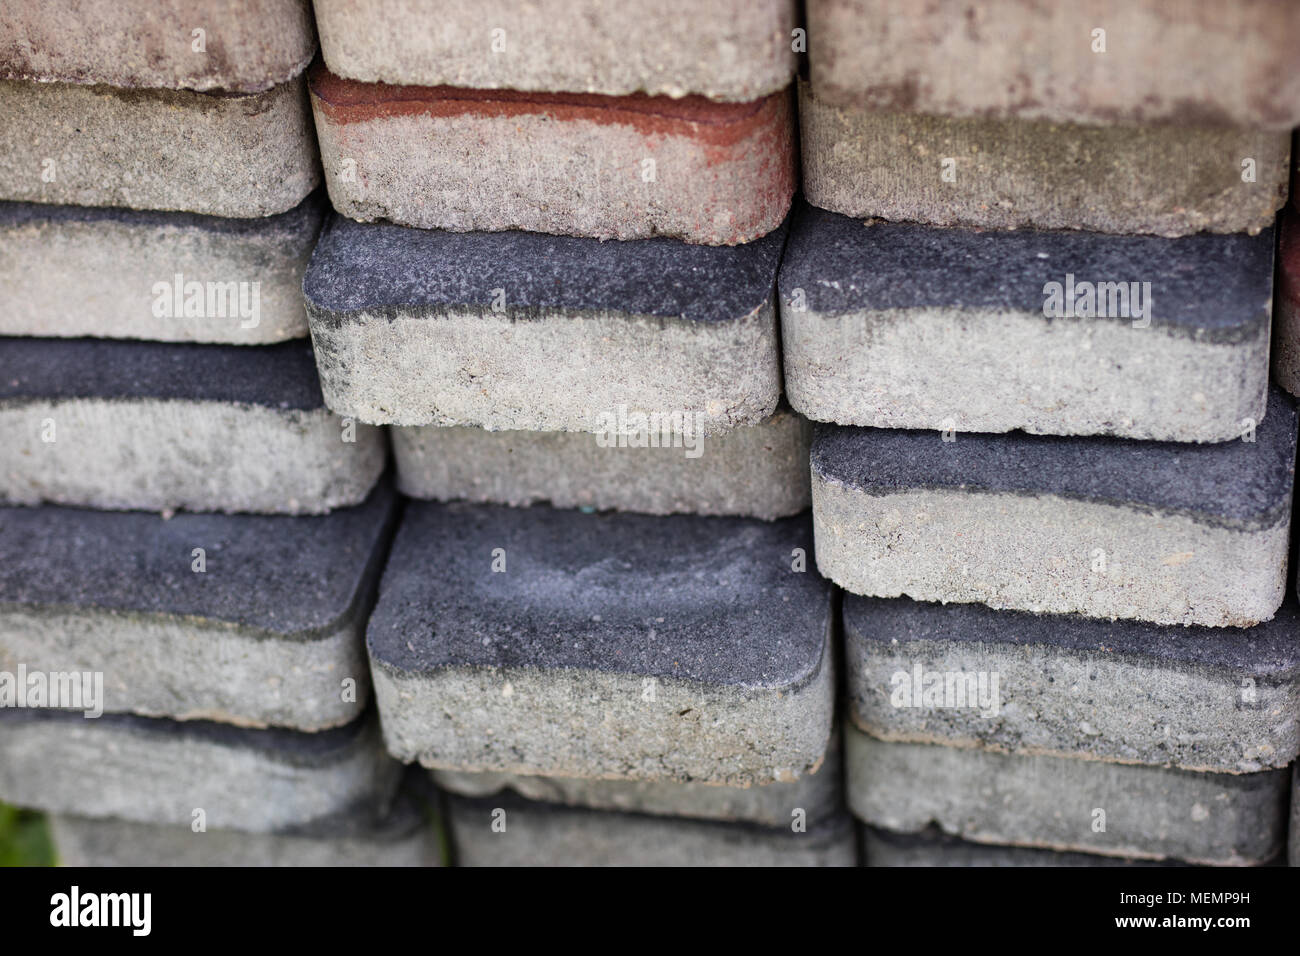 Concrete block used in construction. Building materials for paverists. Season of the spring. Stock Photo